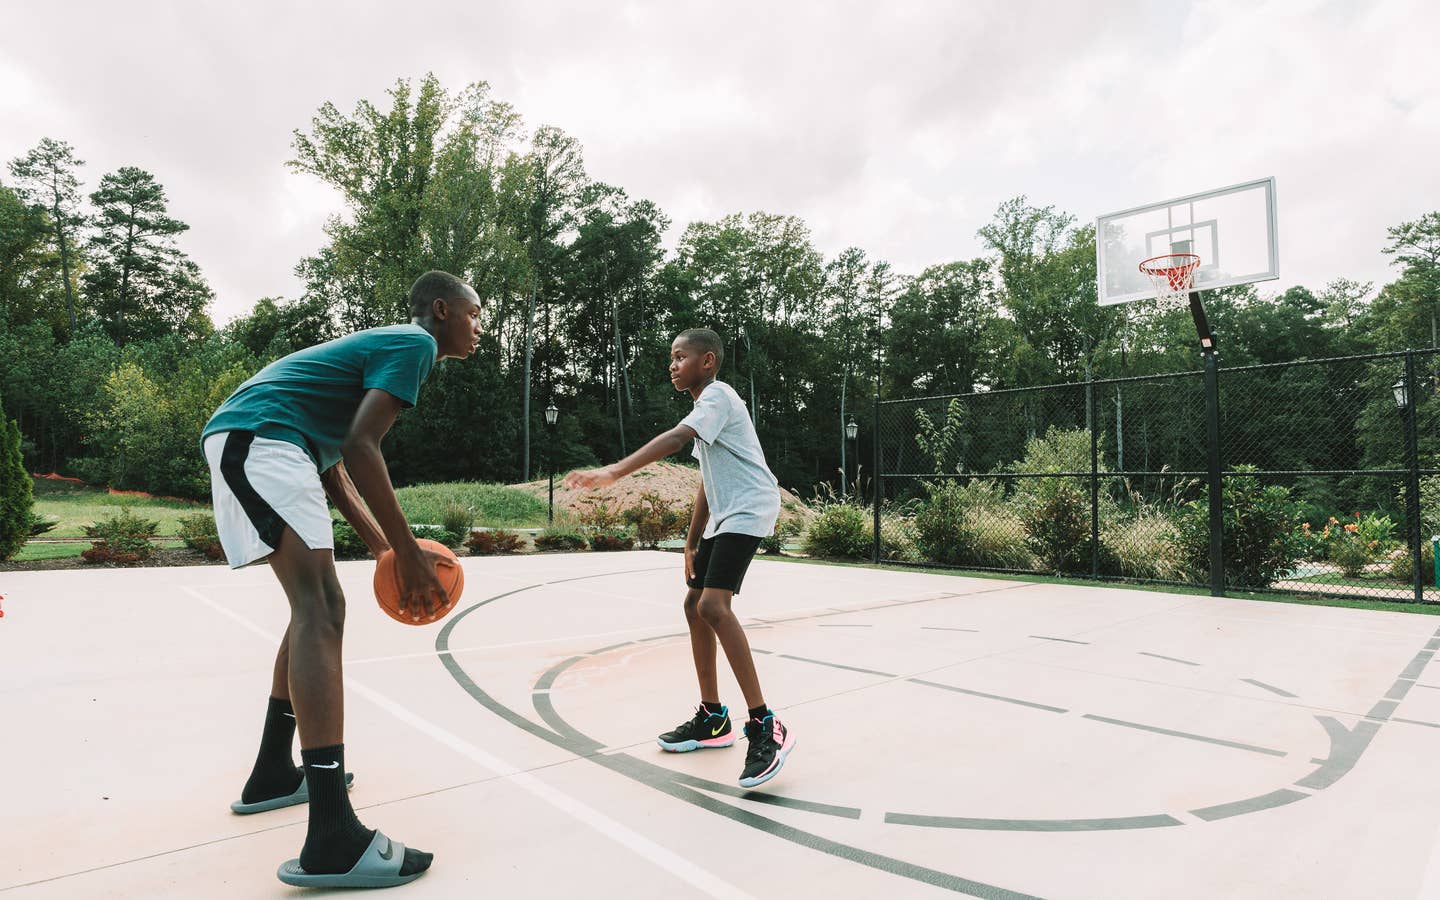 Adult and child playing basketball outdoors at Williamsburg Resort.